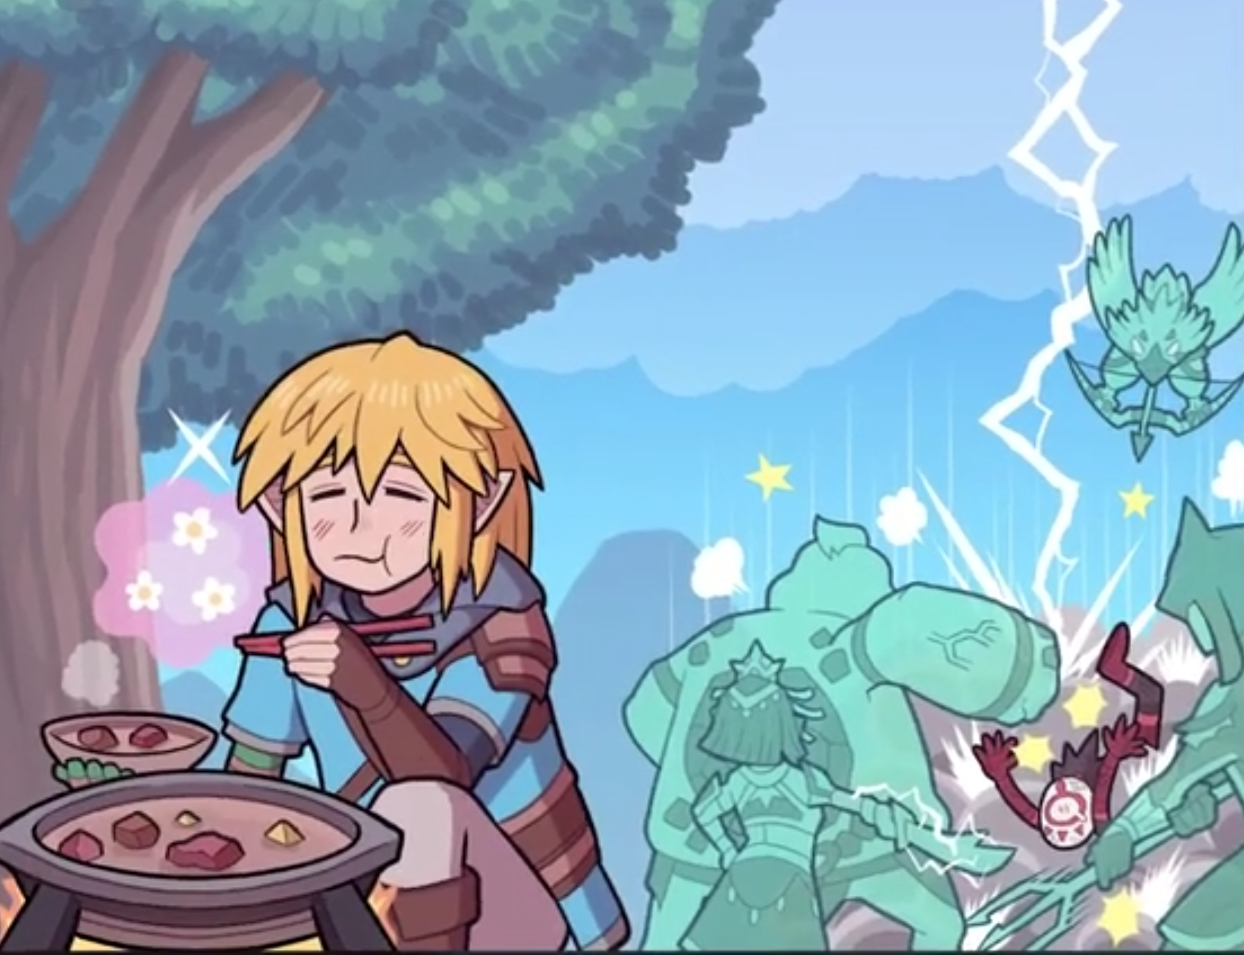 Link eat peacefully, while the Sages beat Yiga down Blank Meme Template